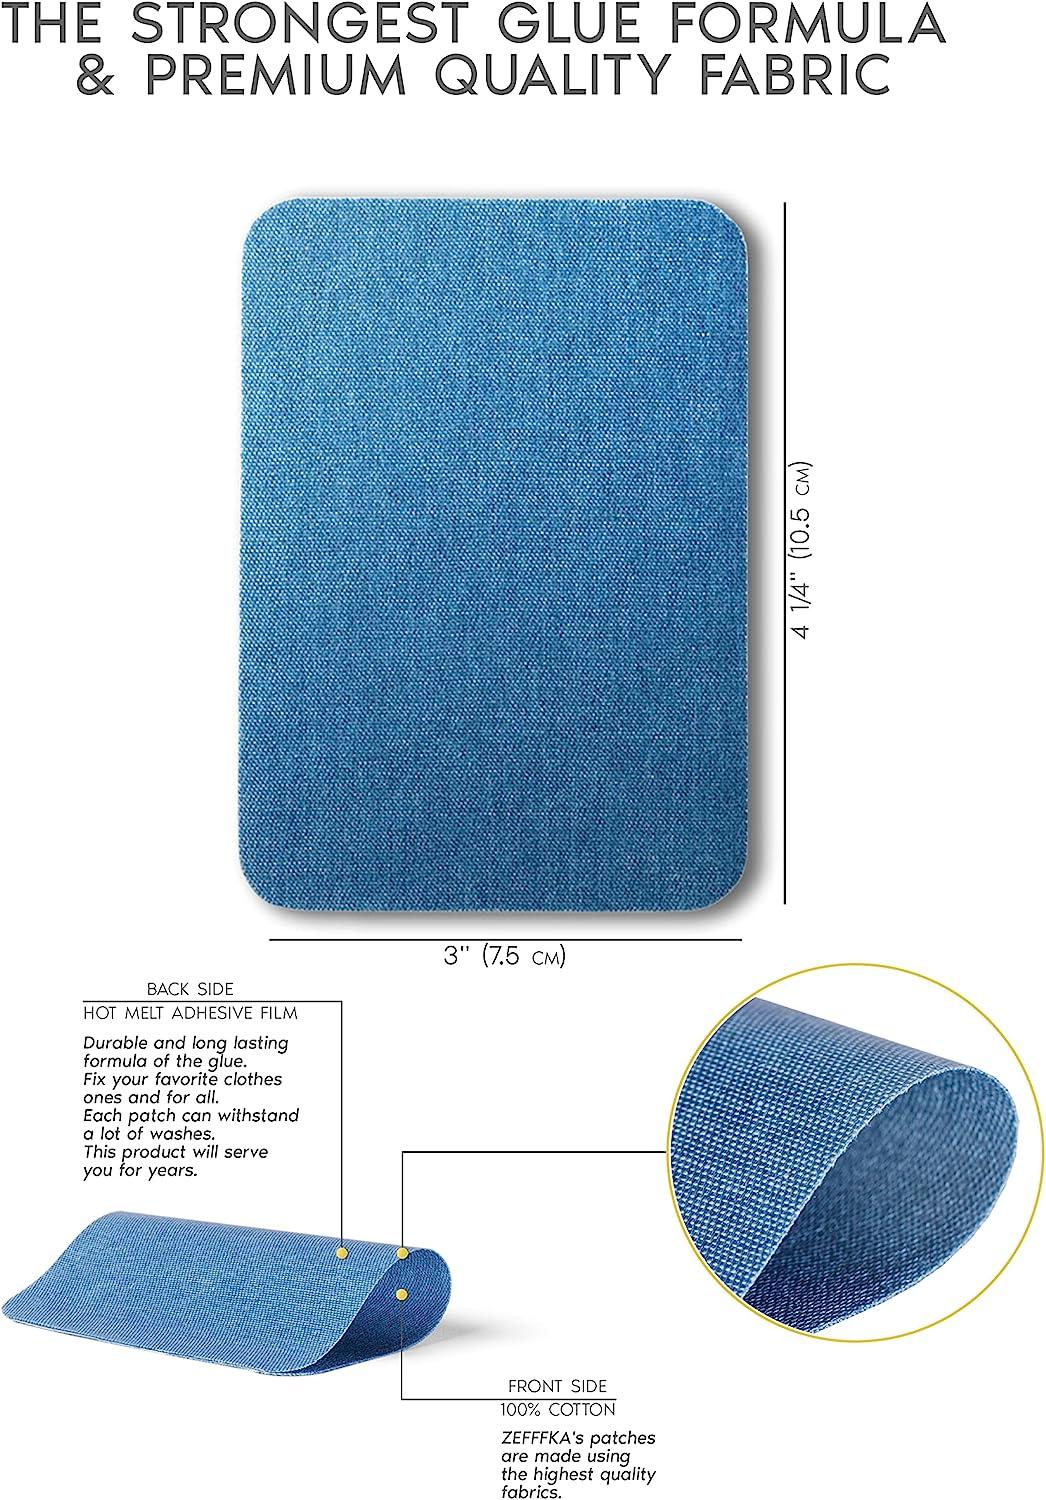 Bastex Iron-on Jean Patches Repair Kit. Inside & Outside. Made with The  Strongest Glue, 100% Cotton Assorted Shades of Blue. 12 Pieces, Size 3 x